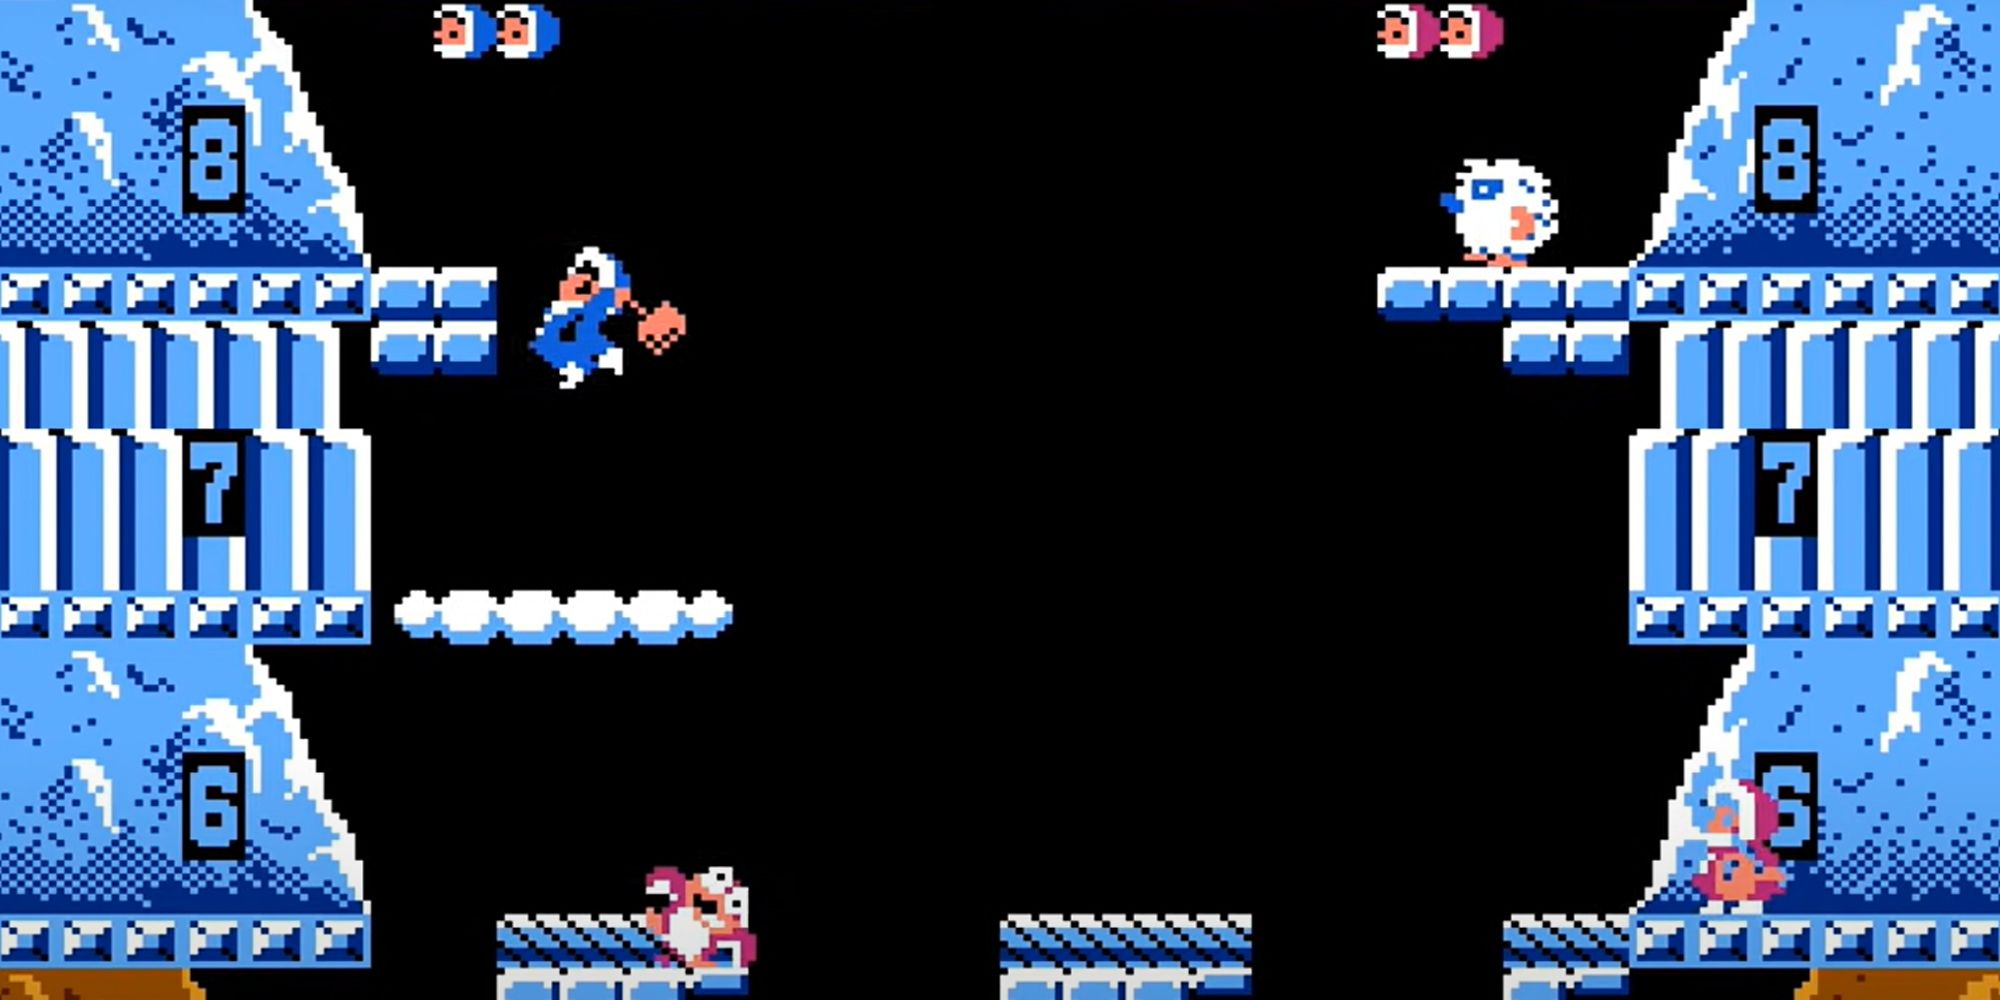 Ice Climber Jumping Up The Screen